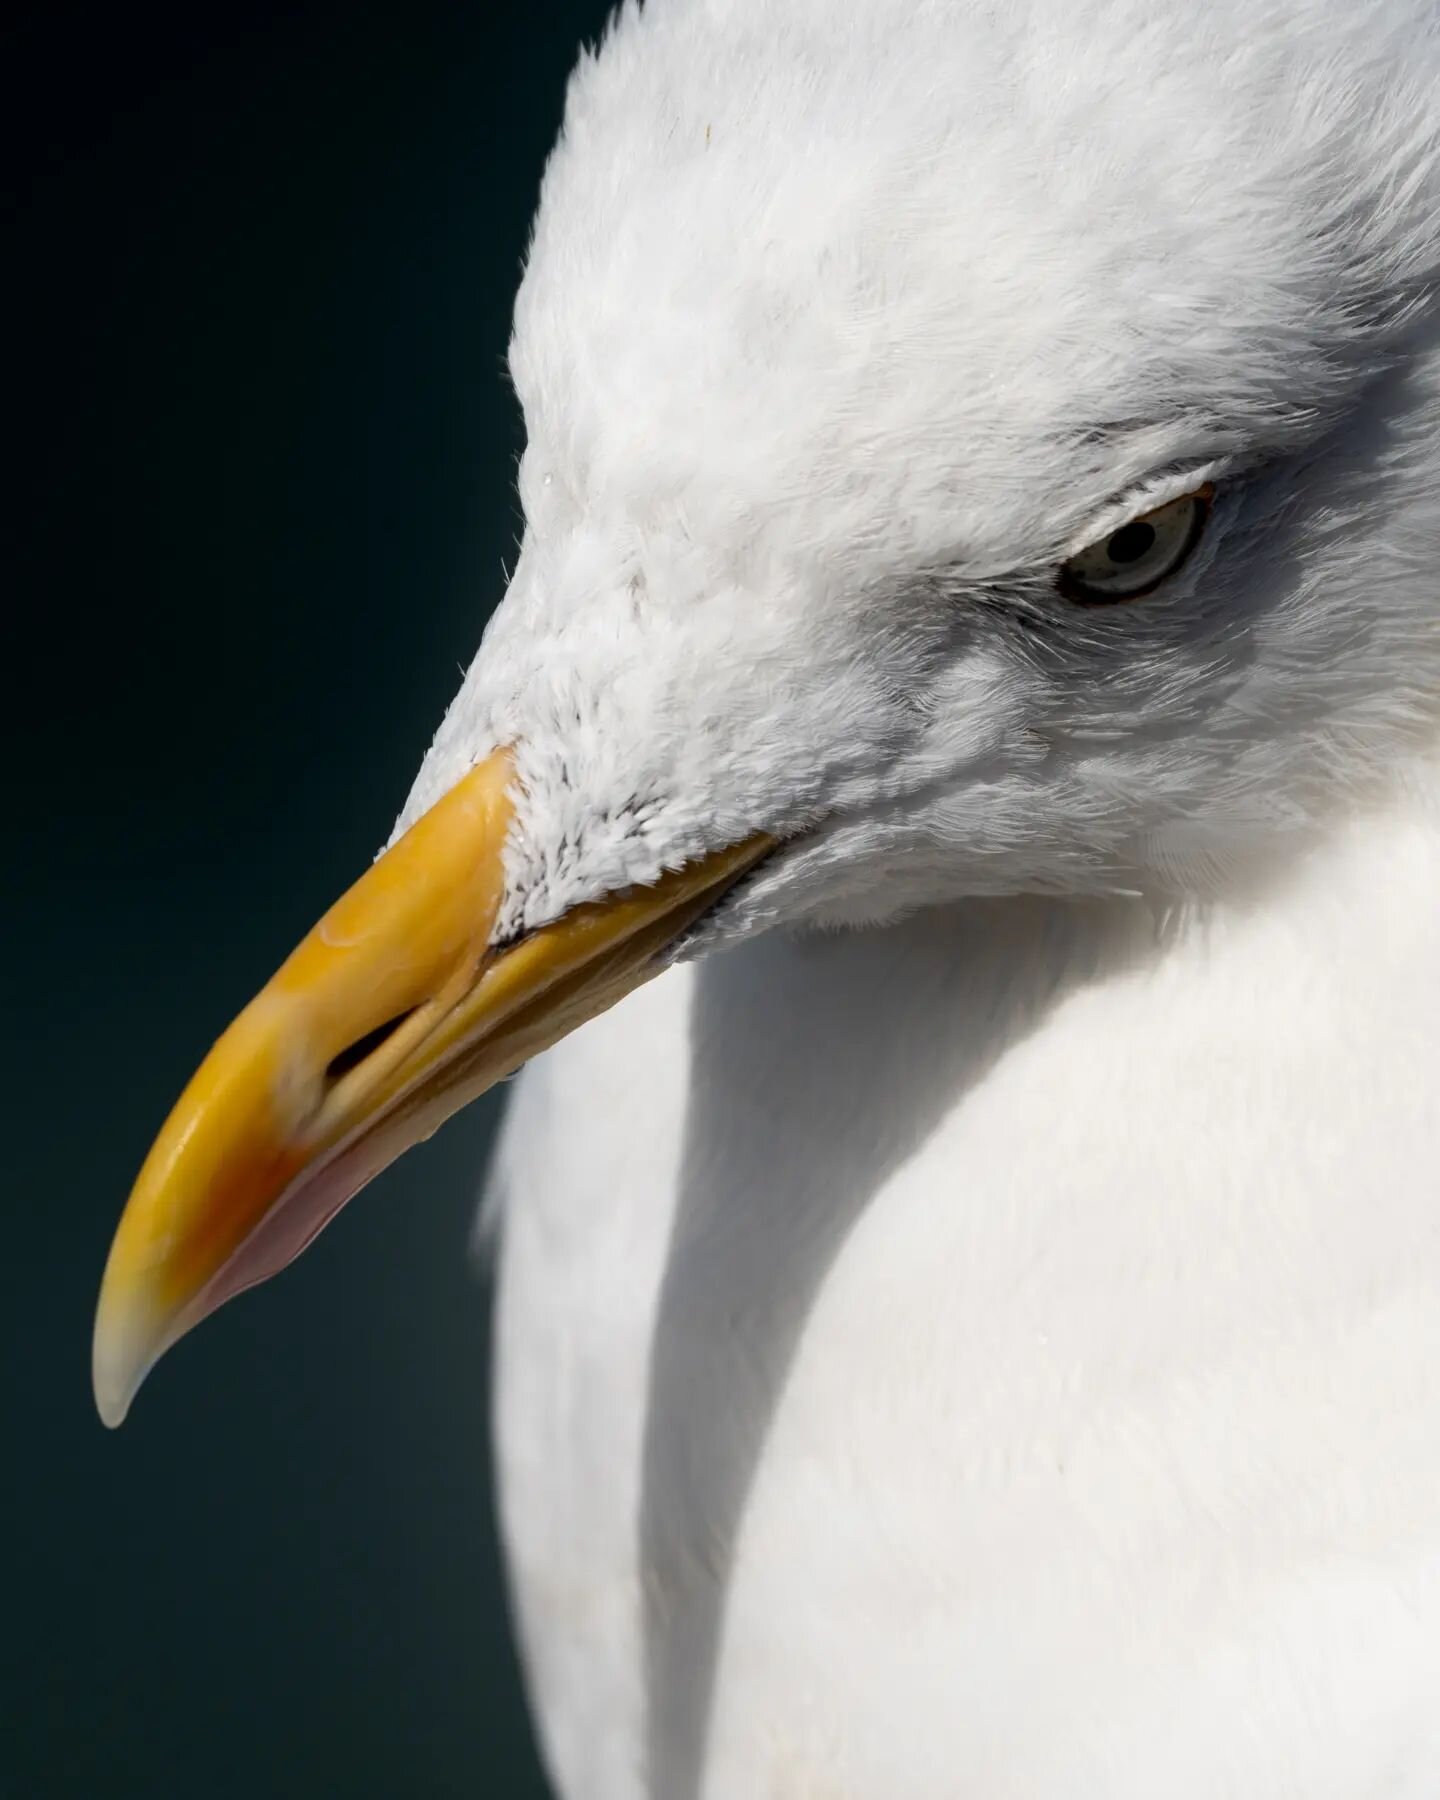 Who thought that seagulls were interesting to take pictures of ? Here is one looking mean, or at least mysterious... 

#seagull #lookingmean #birdcloseup
#featherstyle #crozontourisme #bretagnetourisme #sonybirding #sony200600g